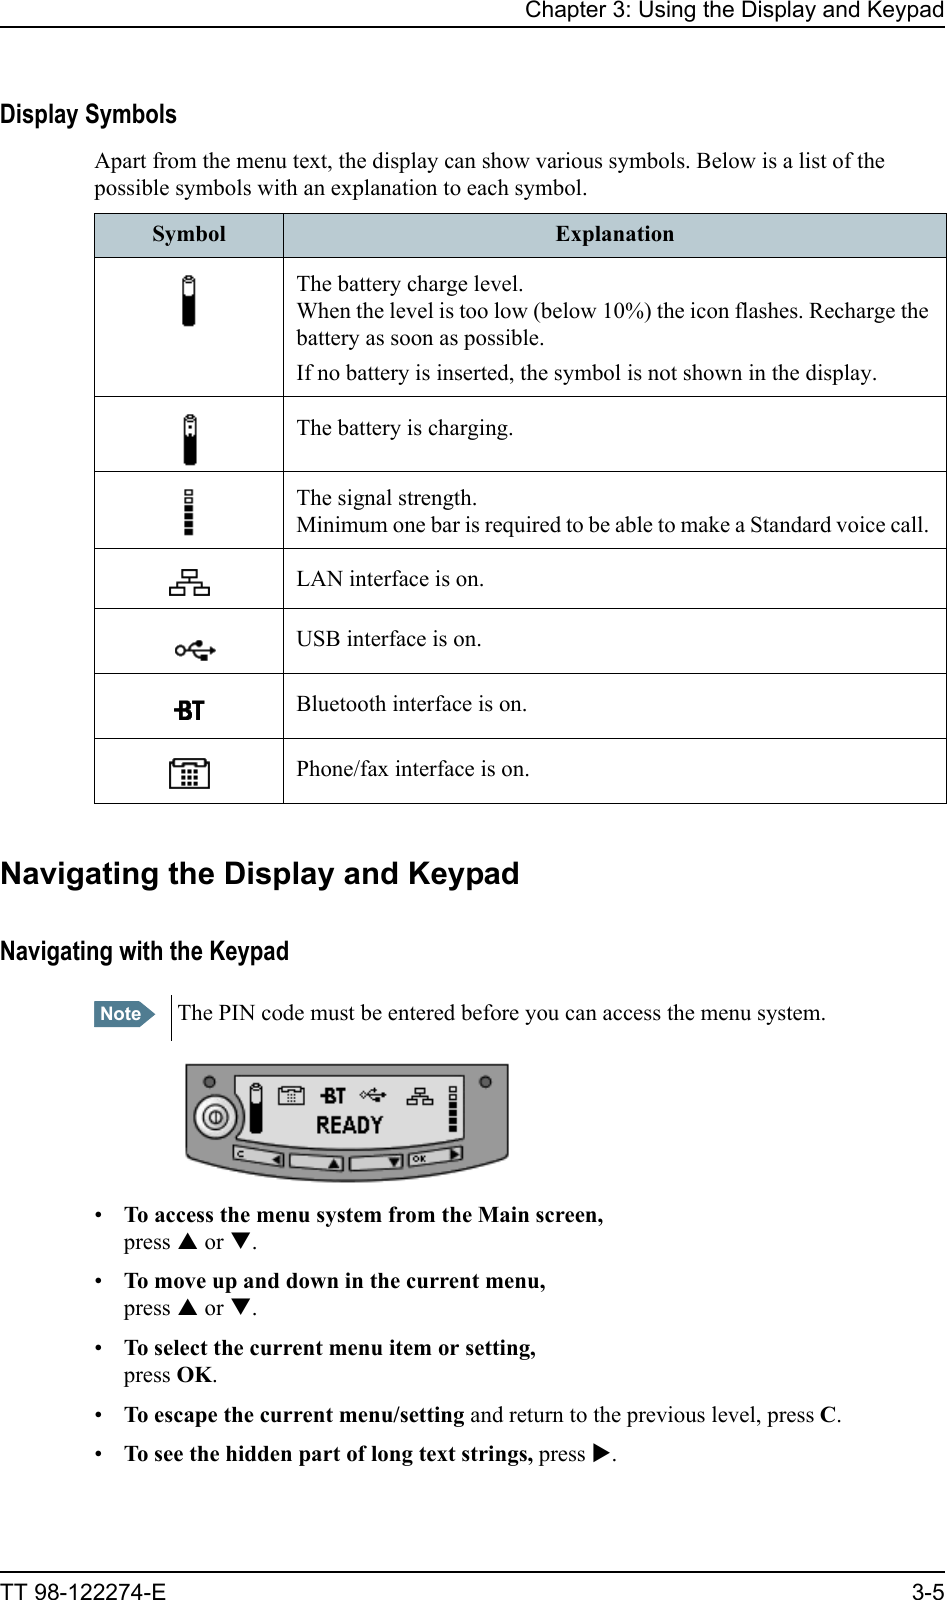 Chapter 3: Using the Display and KeypadTT 98-122274-E 3-5Display SymbolsApart from the menu text, the display can show various symbols. Below is a list of the possible symbols with an explanation to each symbol.Navigating the Display and KeypadNavigating with the Keypad•To access the menu system from the Main screen,press S or T.•To move up and down in the current menu,press S or T.•To select the current menu item or setting,press OK.•To escape the current menu/setting and return to the previous level, press C.•To see the hidden part of long text strings, press X. Symbol ExplanationThe battery charge level. When the level is too low (below 10%) the icon flashes. Recharge the battery as soon as possible.If no battery is inserted, the symbol is not shown in the display.The battery is charging.The signal strength. Minimum one bar is required to be able to make a Standard voice call. LAN interface is on. USB interface is on.Bluetooth interface is on.Phone/fax interface is on.Note The PIN code must be entered before you can access the menu system.